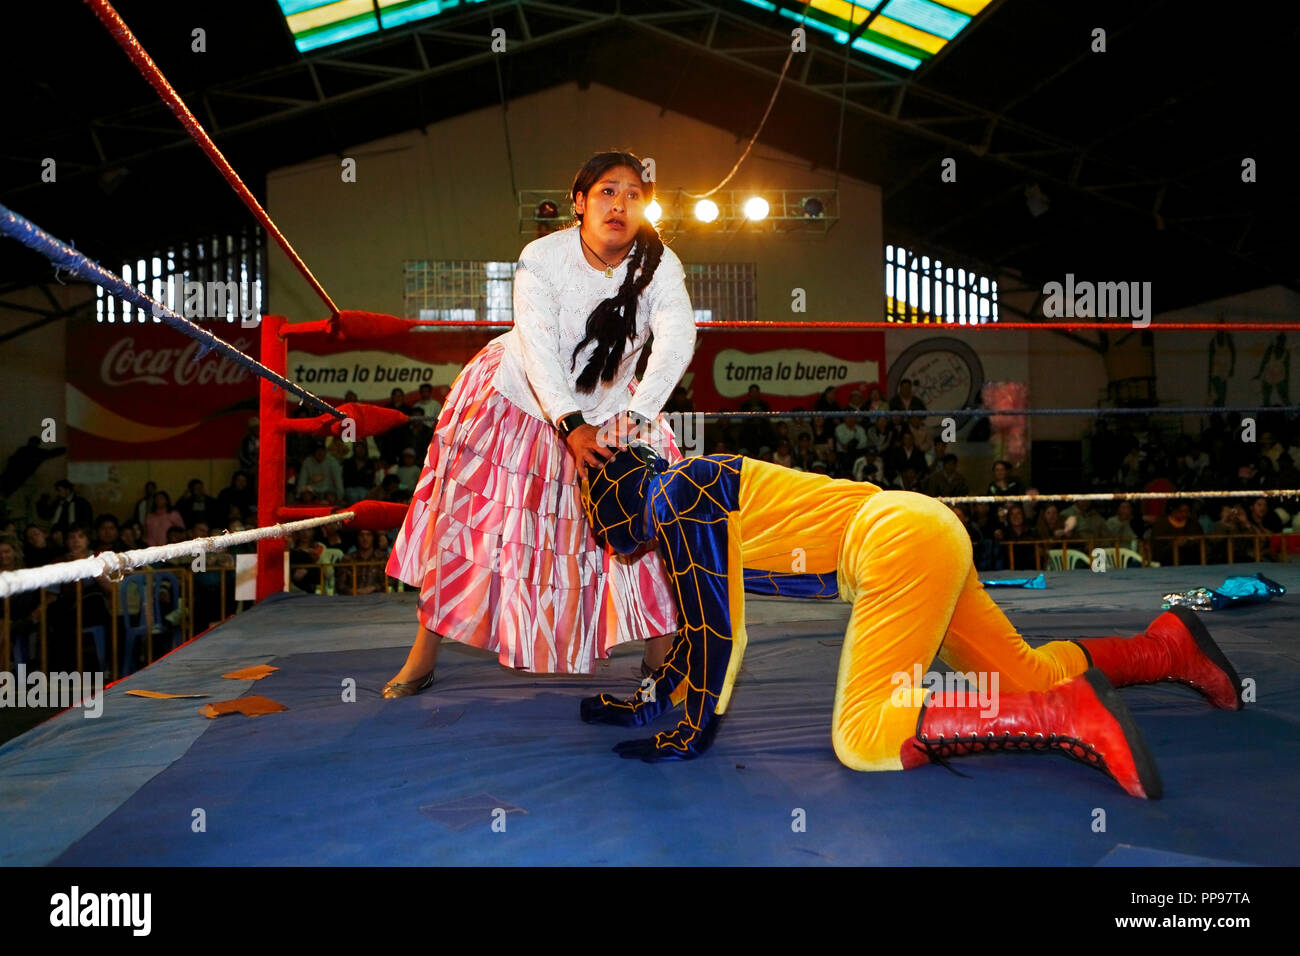 Wrestling star and cholita attendant Jenifer has a lot to play in the fight against the male catcher when she competes in the multi-purpose sports arena Anden Secrets at the Plaza San Pedro in El Alto, above Bolivia's capital, La Paz, where every Saturday afternoon is the main attraction Cholita's wrestling takes place. Stock Photo